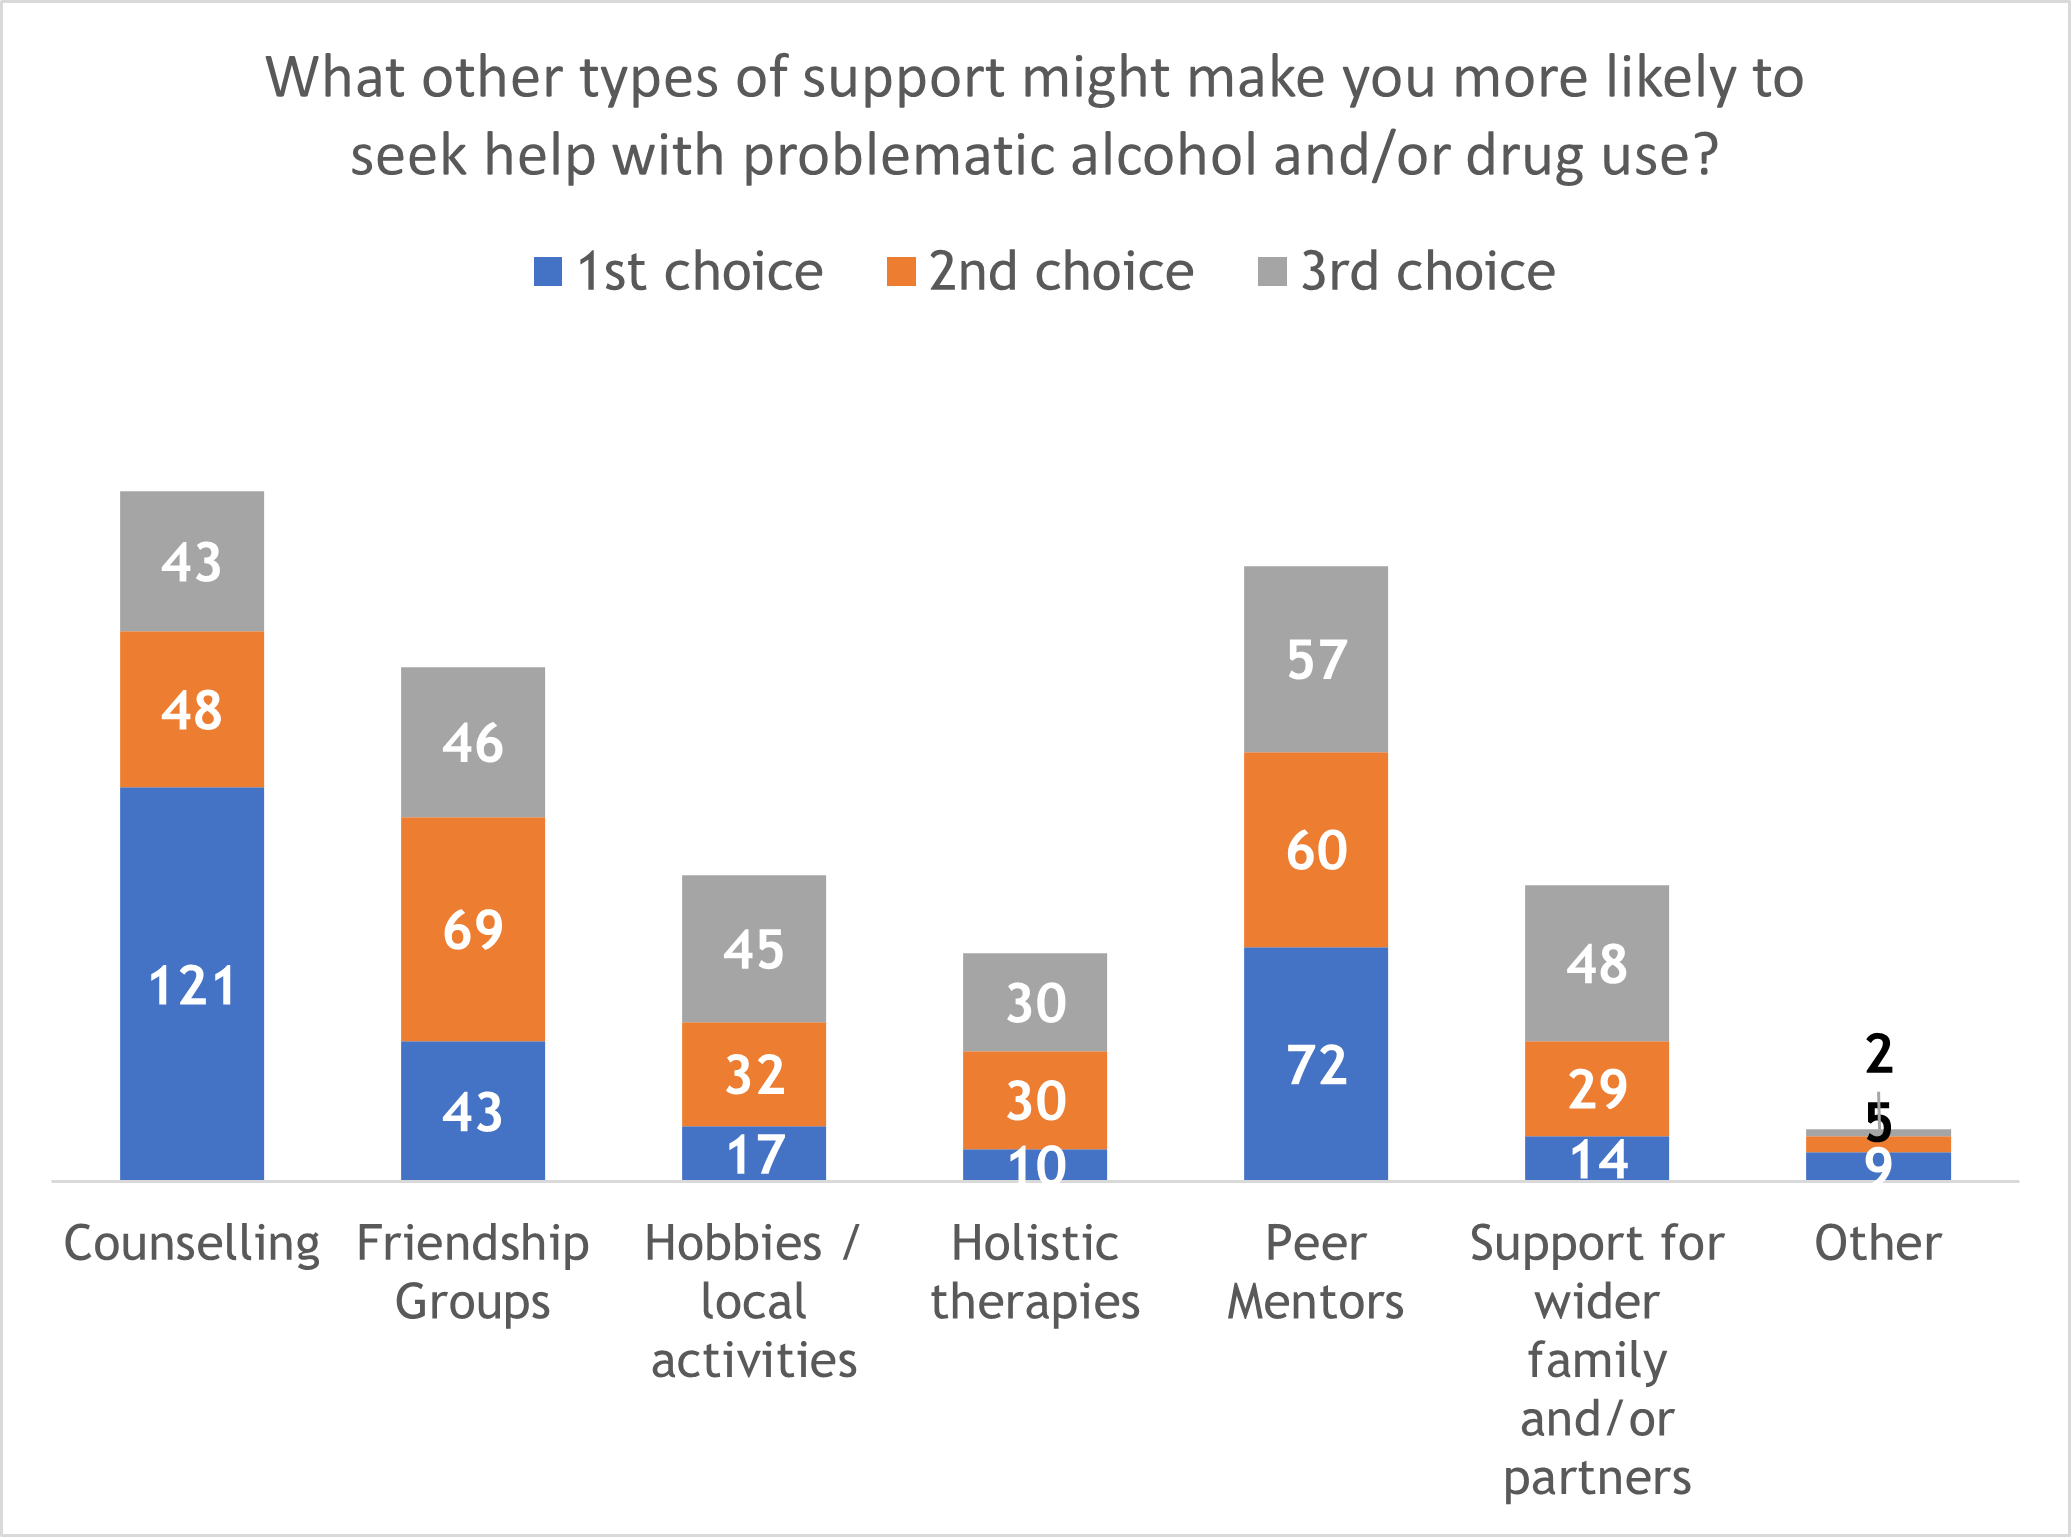 A chart showing the types of support that might make respondents more likely to seek help with problematic alcohol and/or drug use. Respondents could make a 1st, 2nd and 3rd choice.  Counselling, first choice 121, second choice 48, third choice 43. Friendship Groups, first choice 43, second choice 69, third choice 46. Hobbies / local activities, first choice 17, second choice 32, third choice 45.  Holistic therapies, first choice 10, second choice 30, third choice 30. Peer mentors, first choice 72, second choice 60, third choice 57. Support for wider family and/or partner, first choice 14, second choice 29, third choice 48.  Other, first choice 9, second choice 5, third choice 2. 